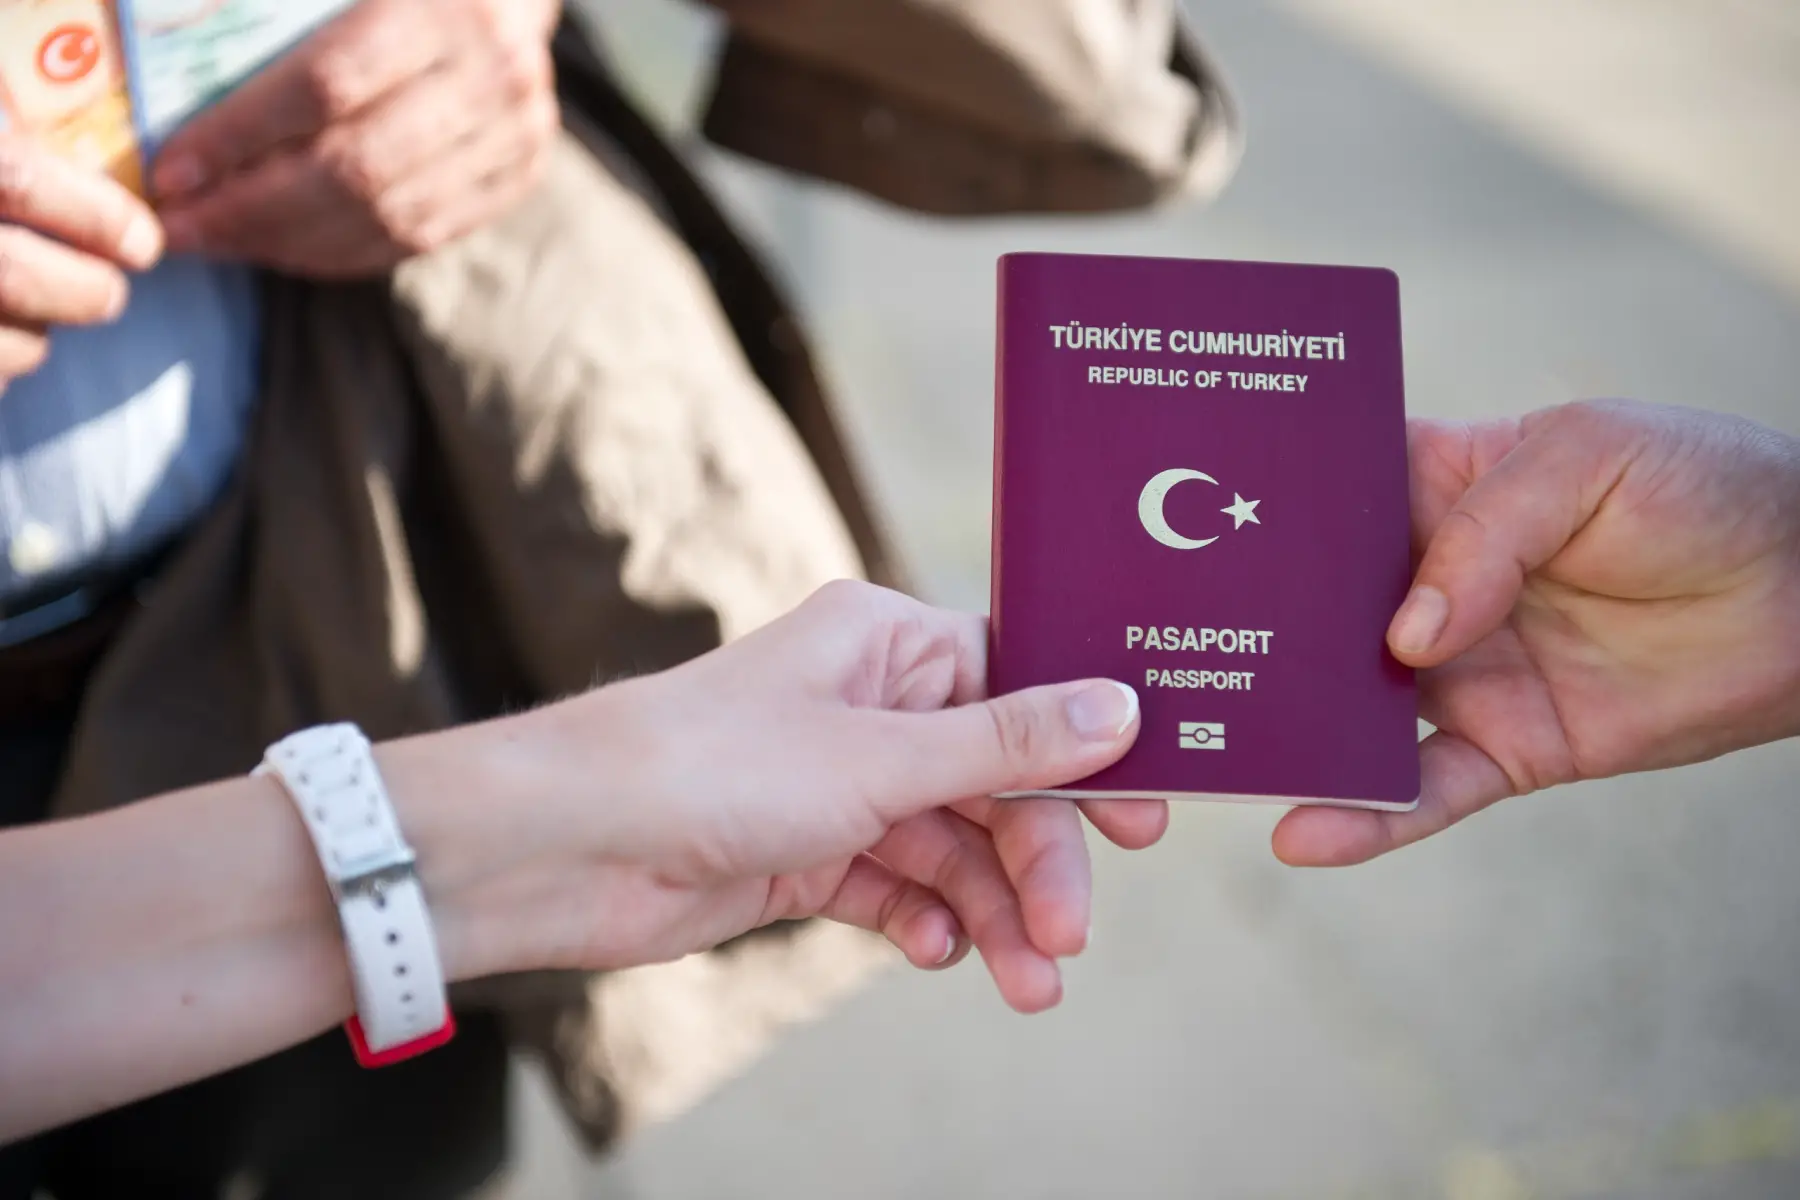 Two people pass a Turkish passport between them